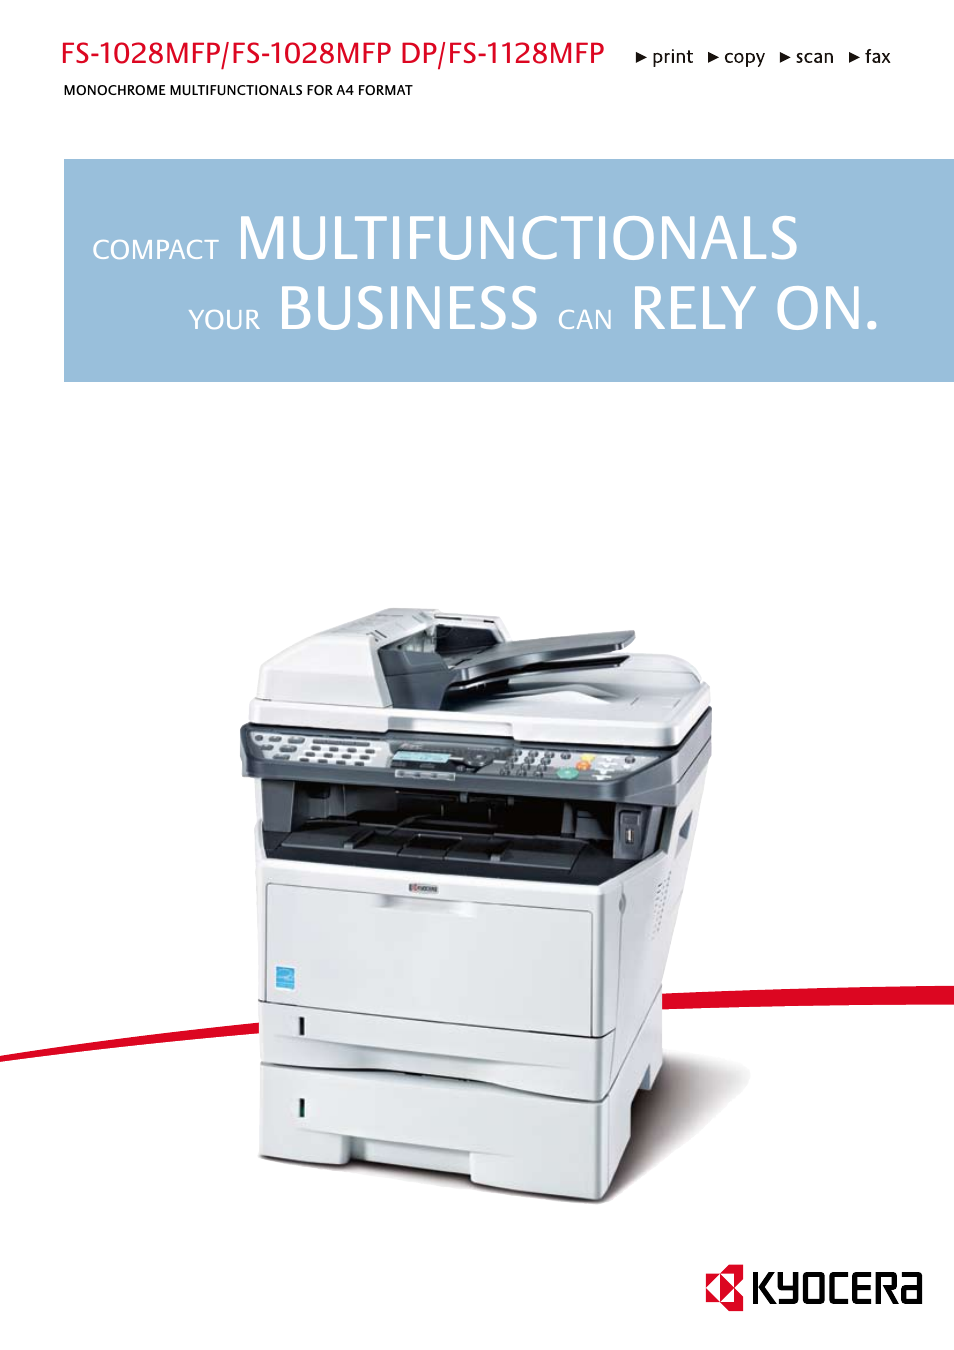 MONOCHROME MULTIFUNCTIONALS FOR A4 FORMAT FS-1028MFP DP